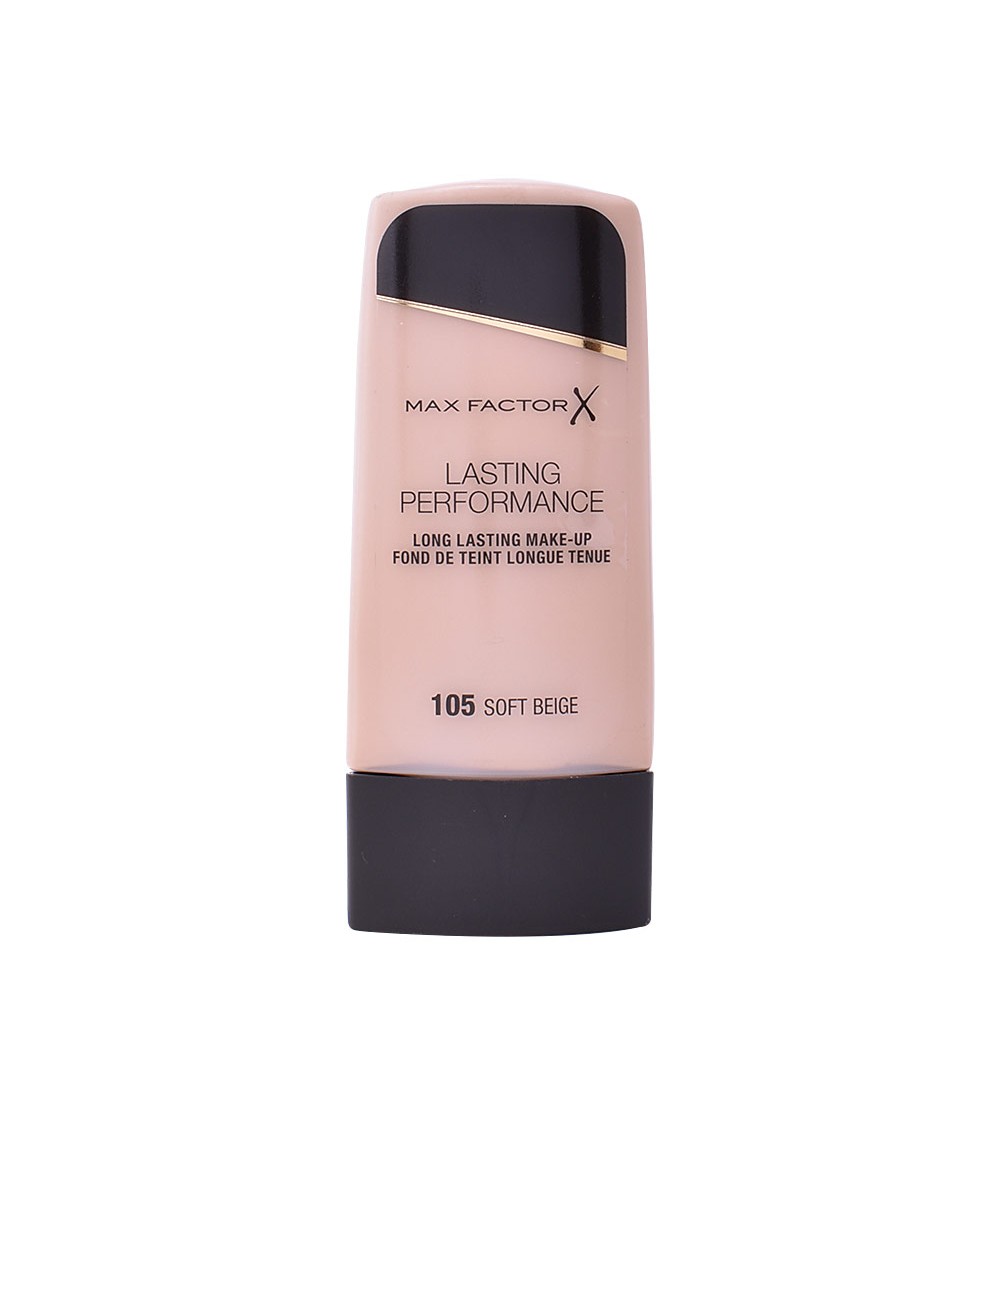 LASTING PERFORMANCE touch proof 105-soft beige